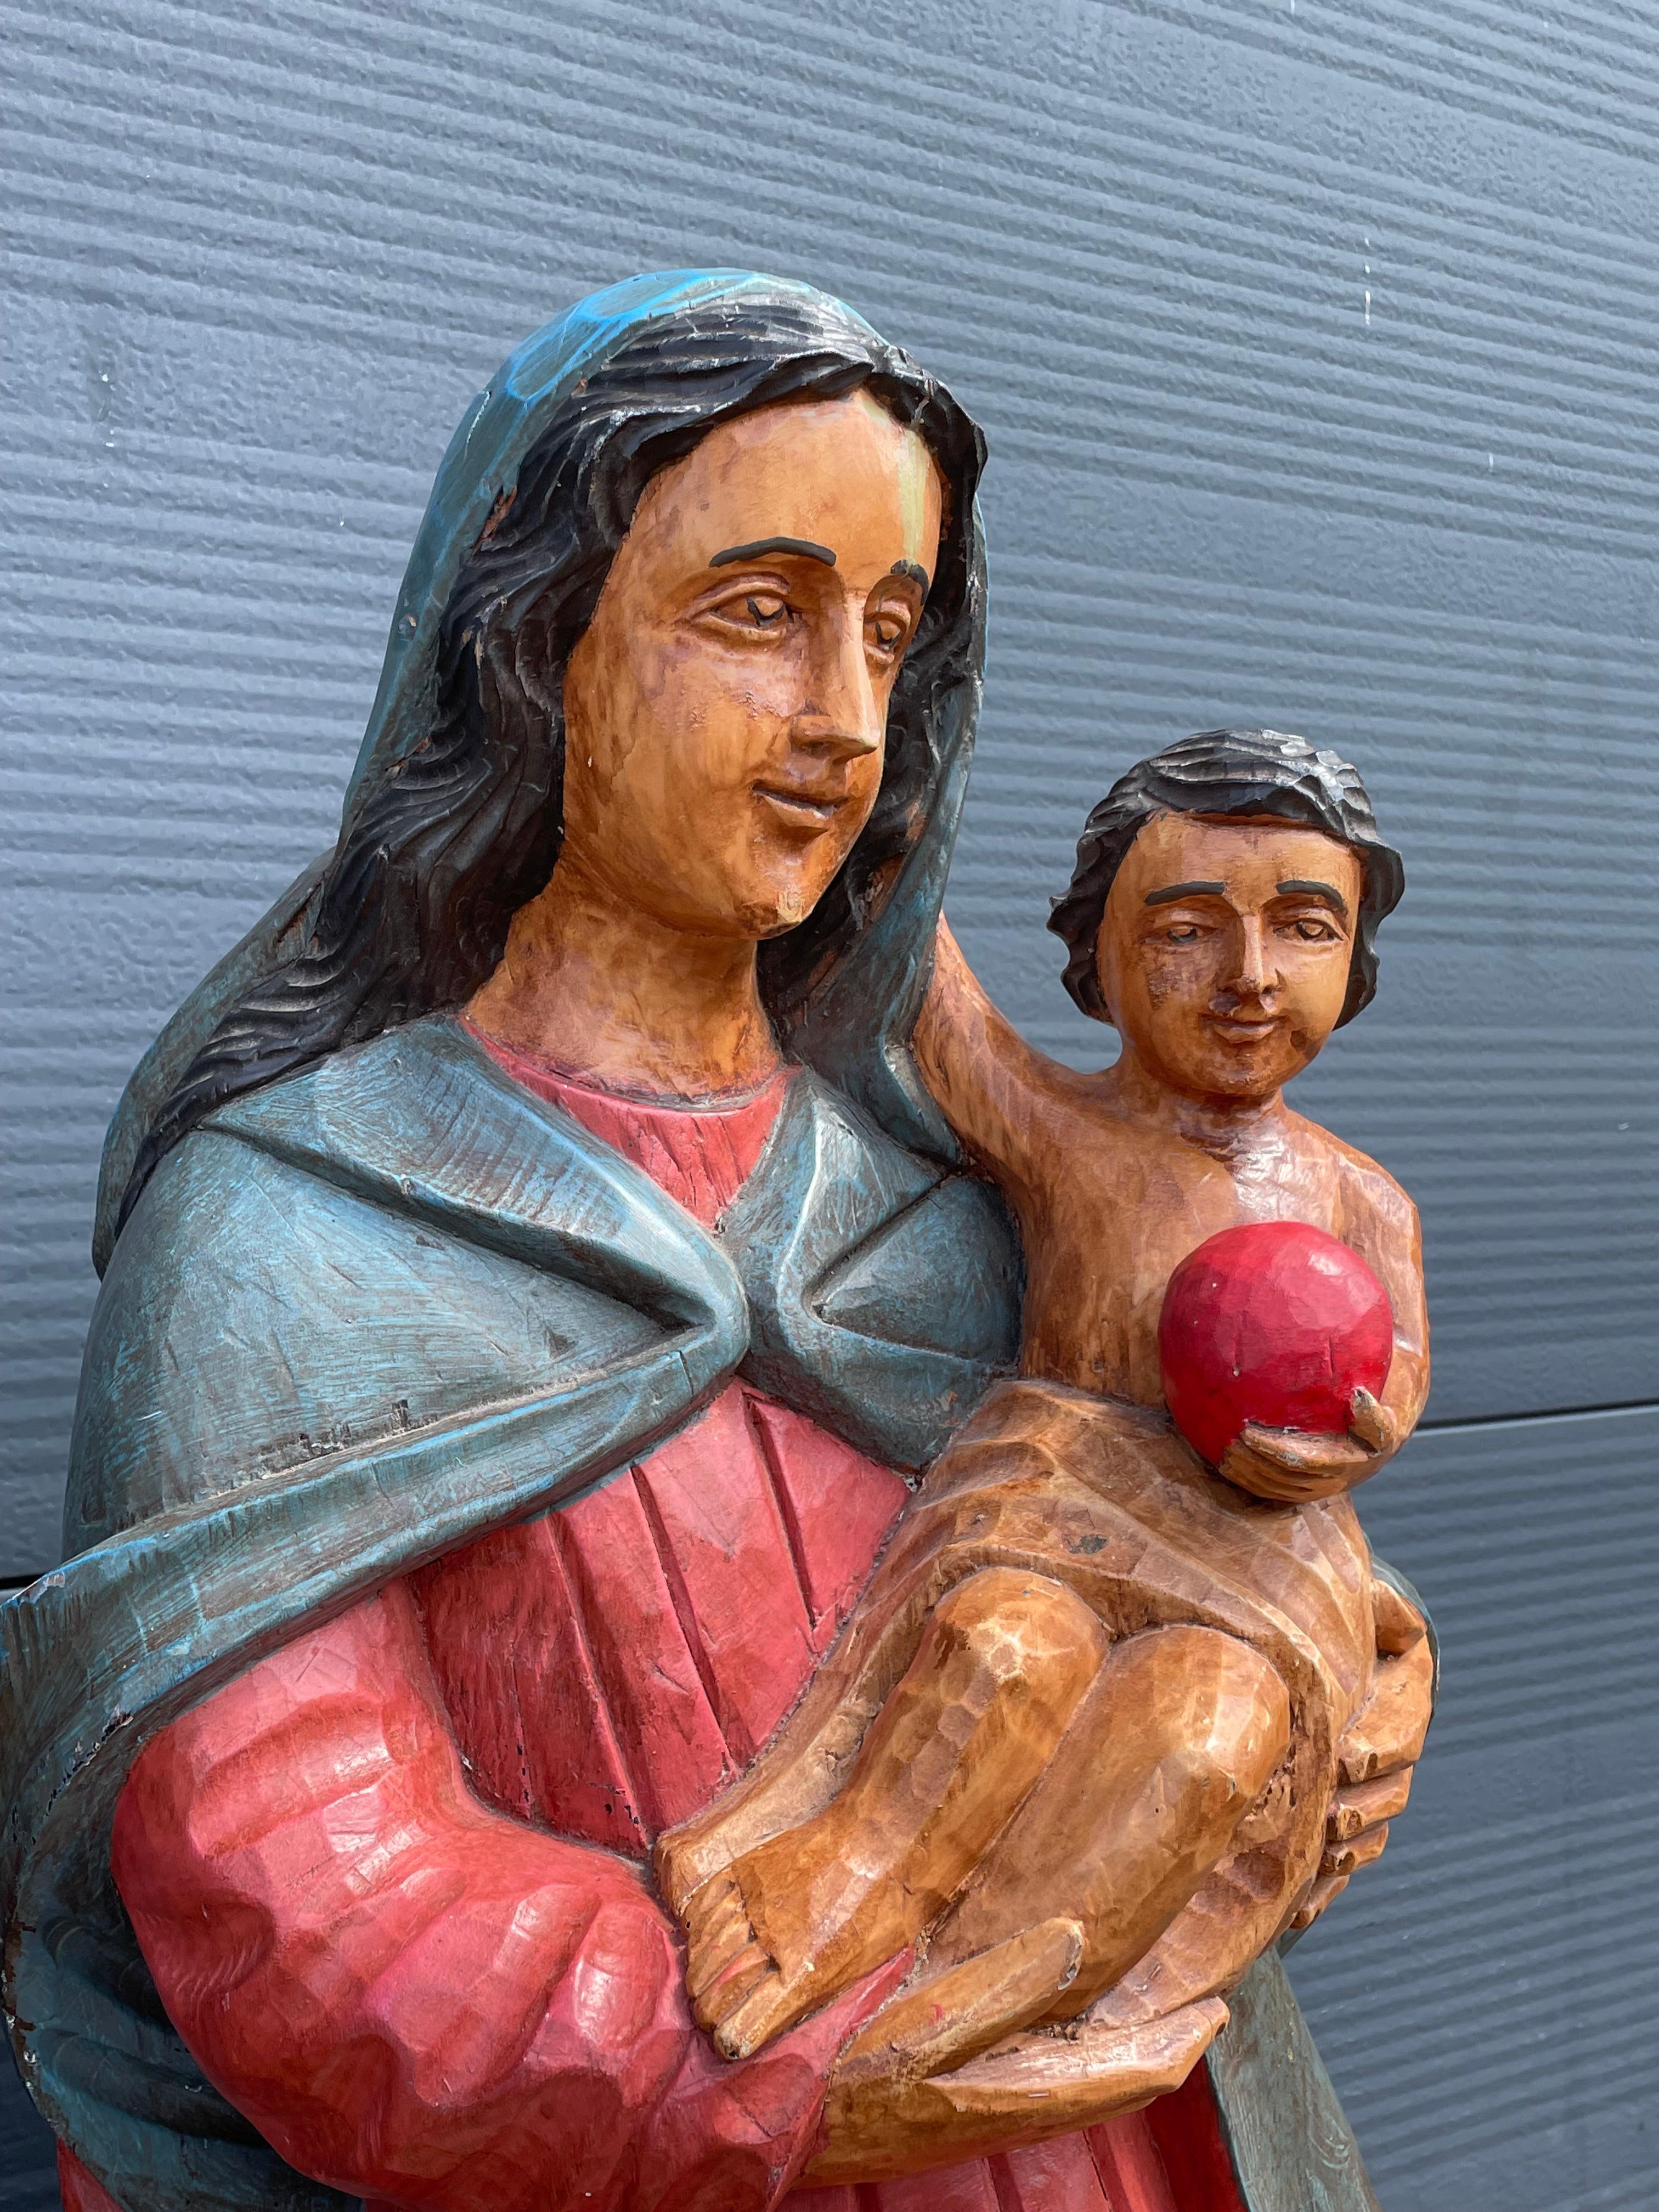 Large Pair of Hand Carved Wooden Mary & Joseph Sculptures, Both with Child Jesus (20. Jahrhundert) im Angebot